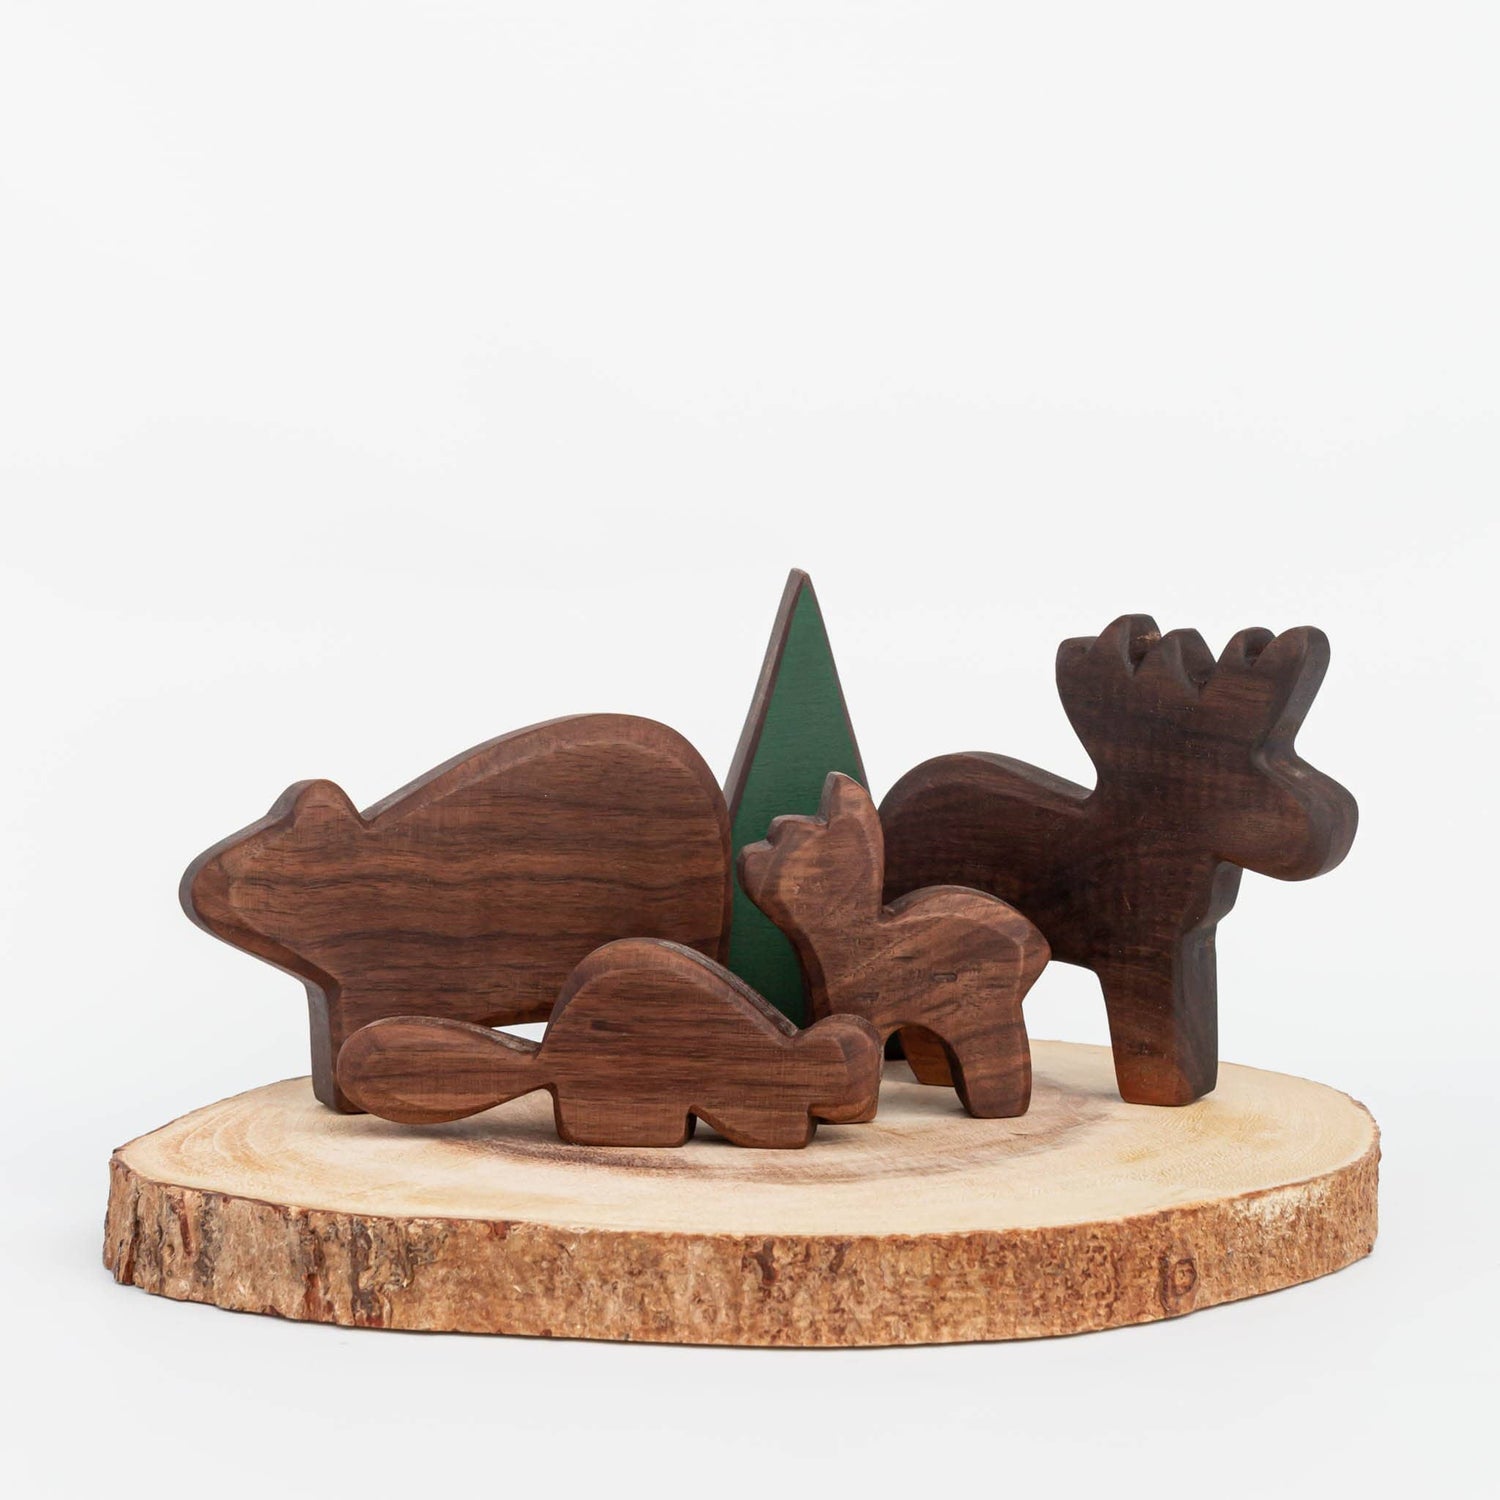 Made in Canada Collection  Wooden Toys Made in Canada – The Playful Peacock